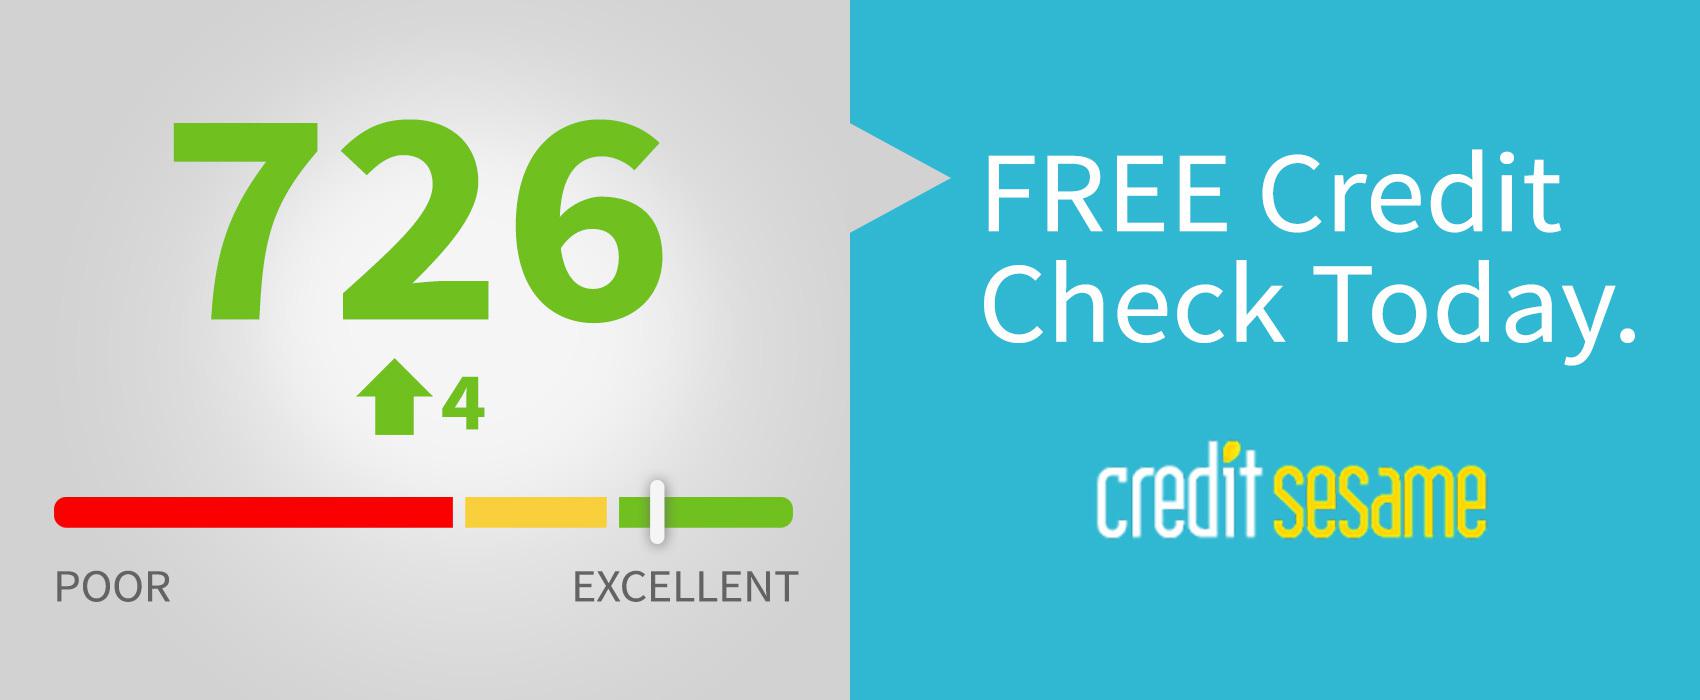 Find Out Your Credit Scoreâ For Free!